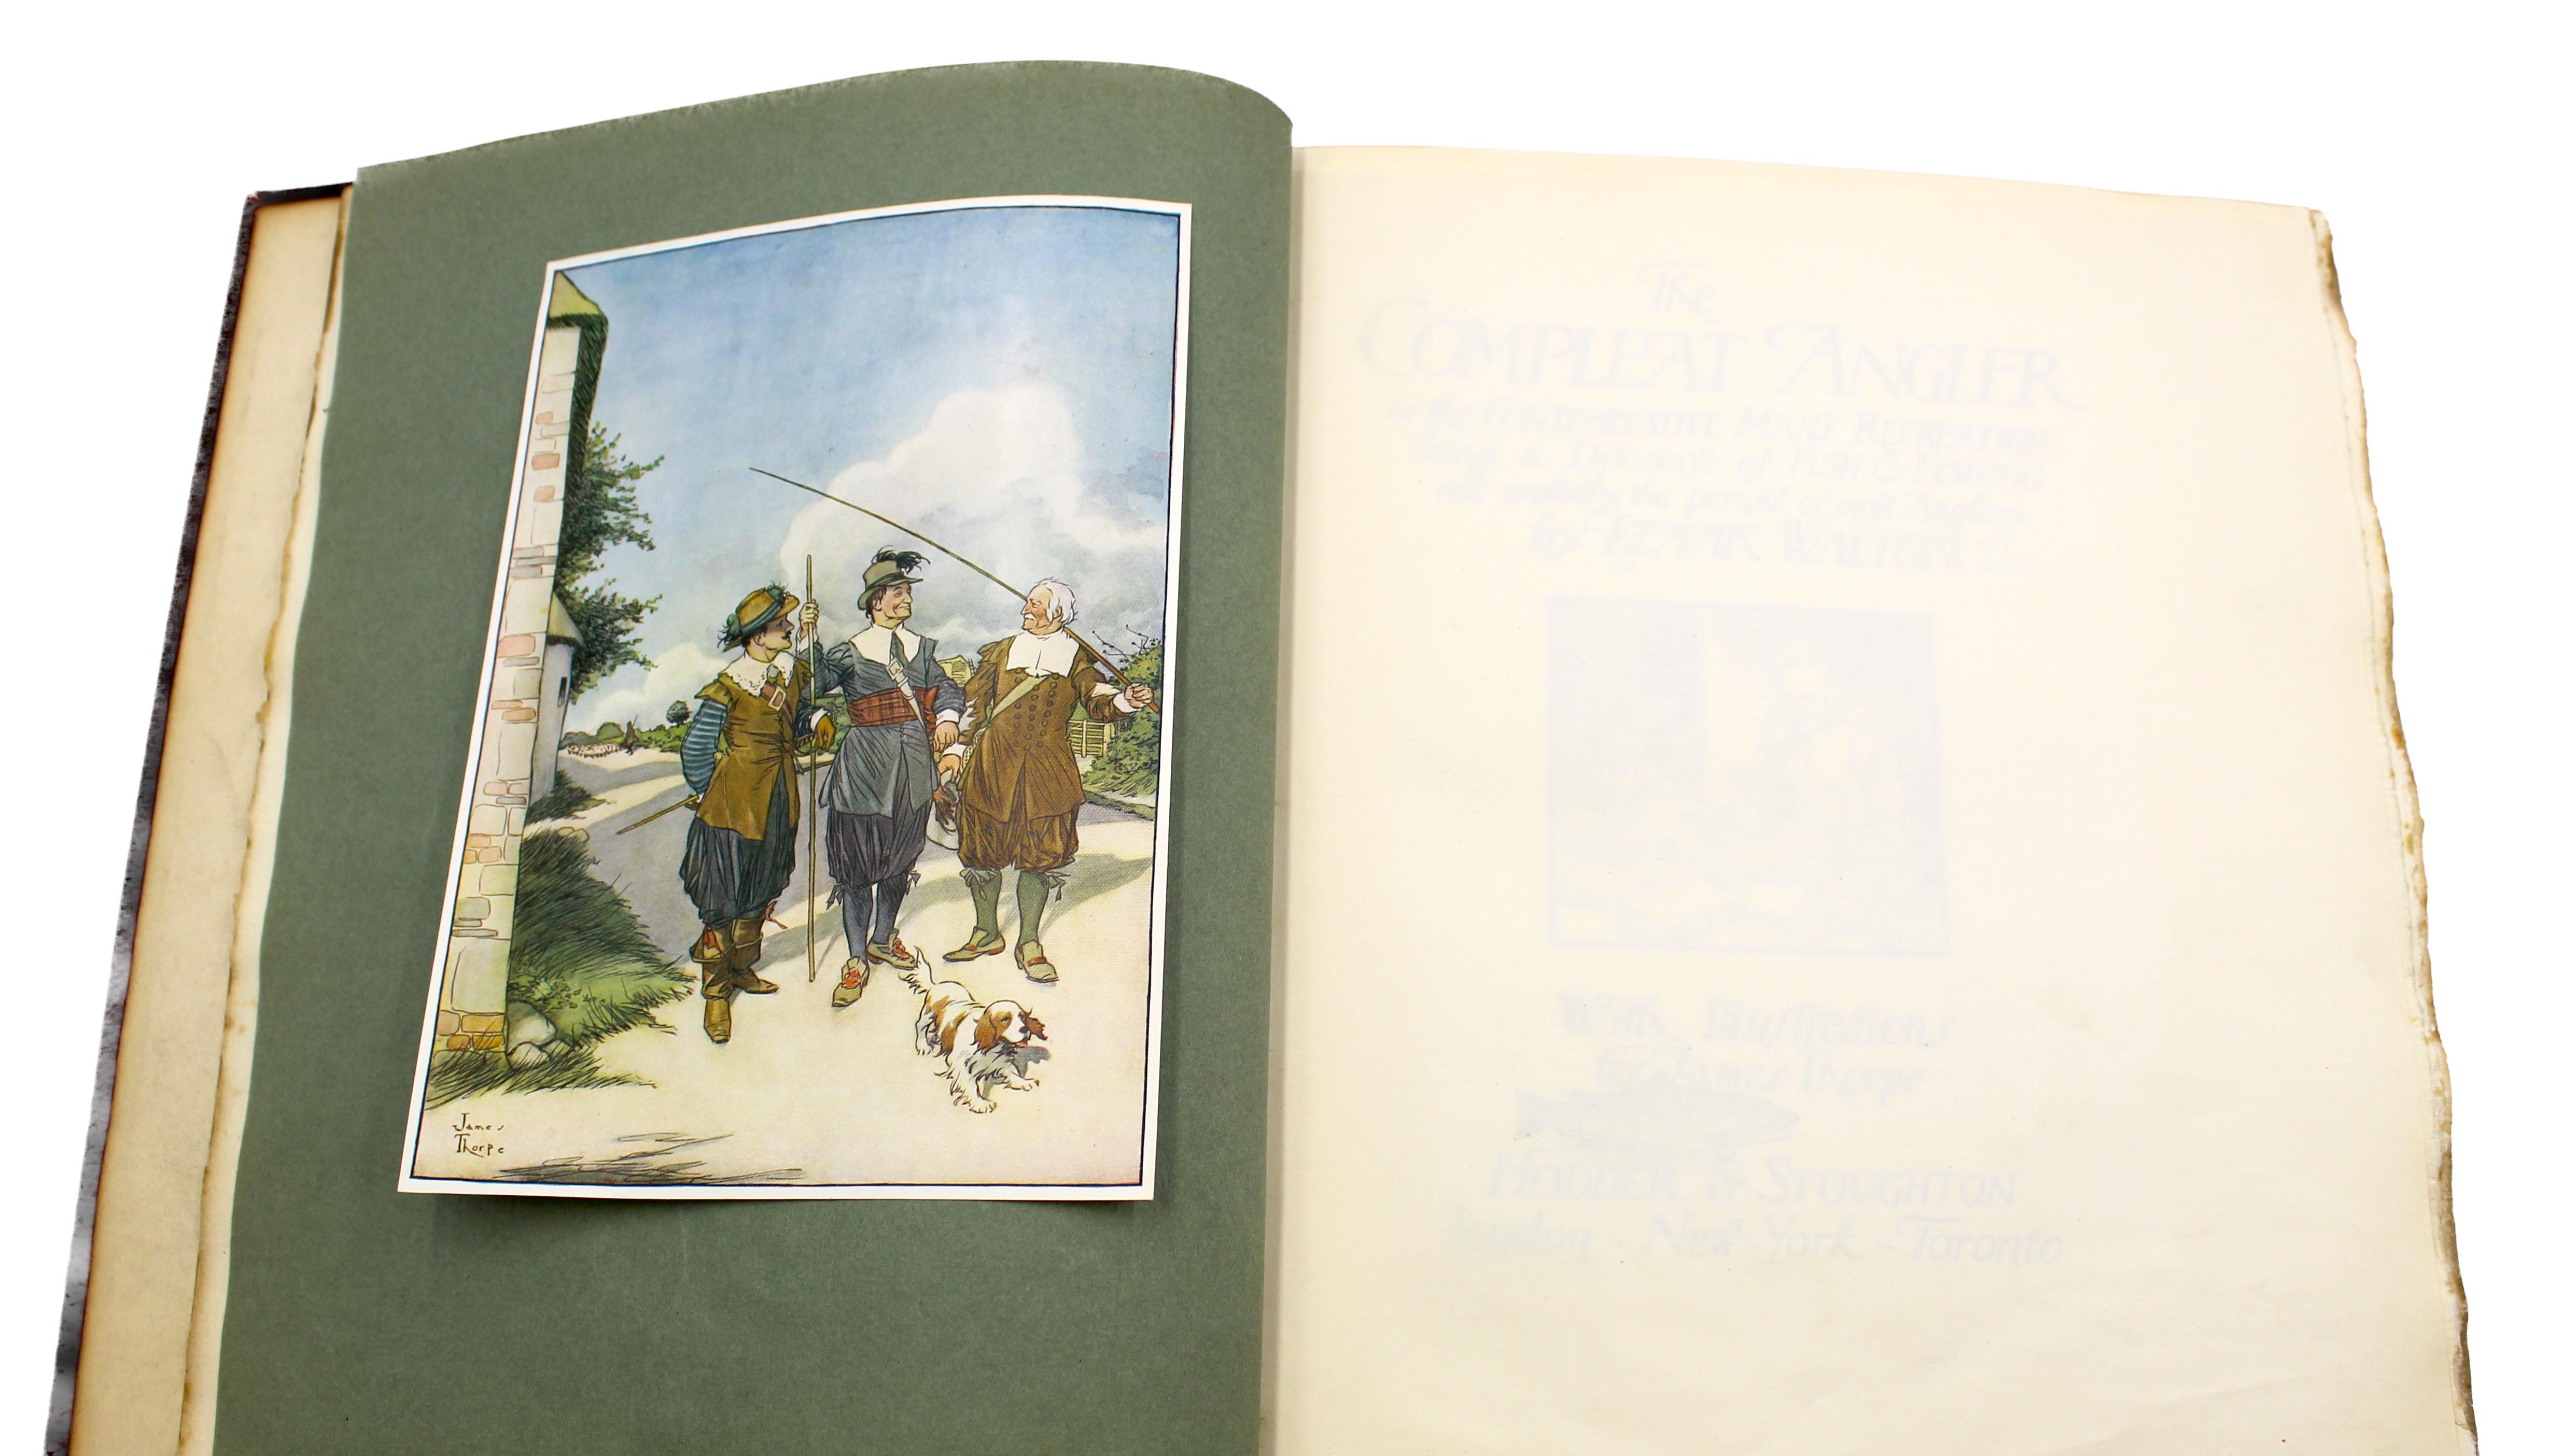 Early 20th Century The Compleat Angler by Izaak Walton, Illustrated and Signed by J. Thorpe, 1911